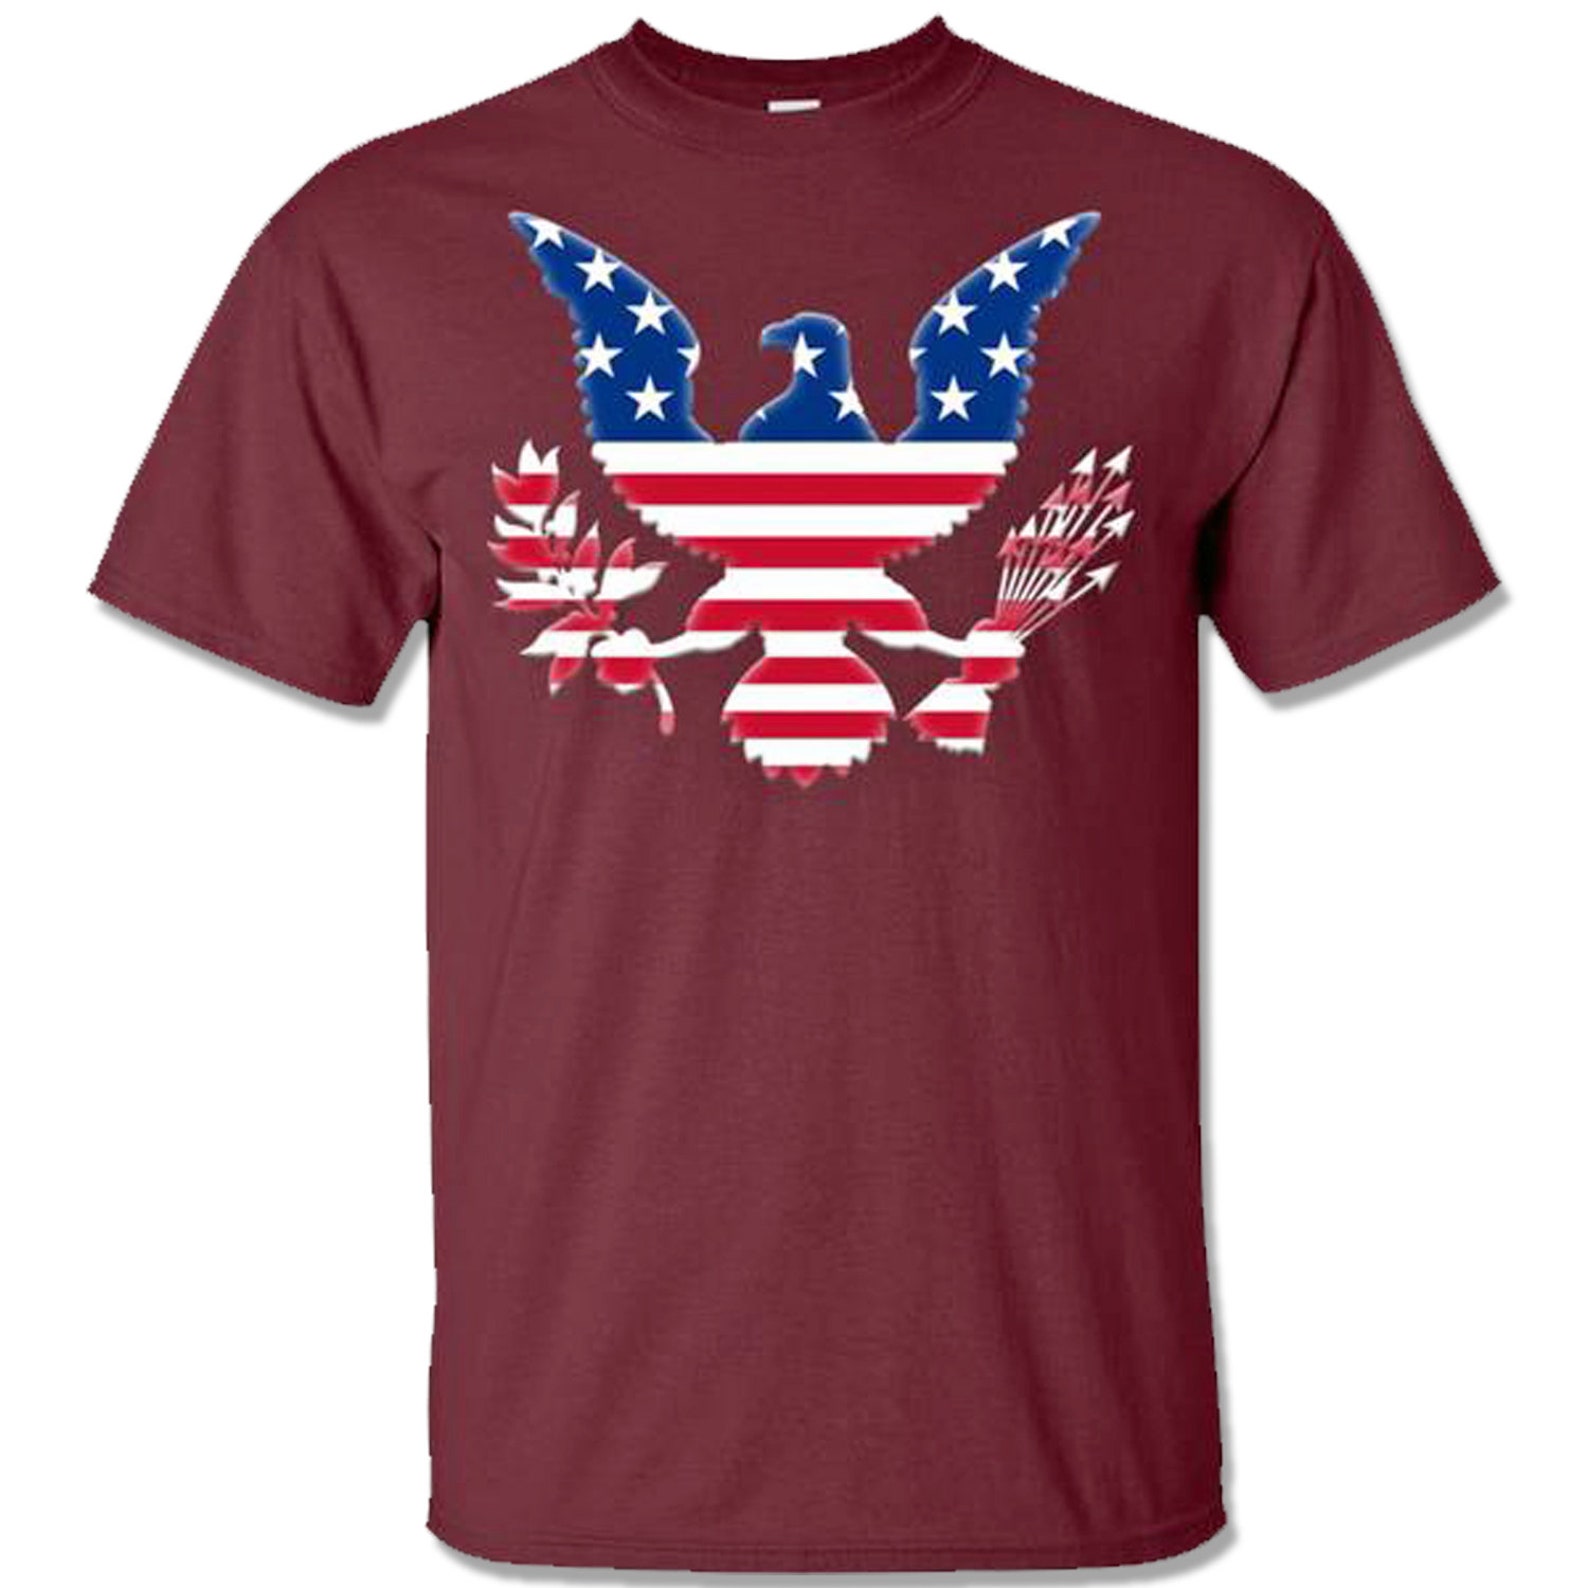 Patriotic Eagle Silhouette T-shirt Red White and Blue Eagle - Etsy